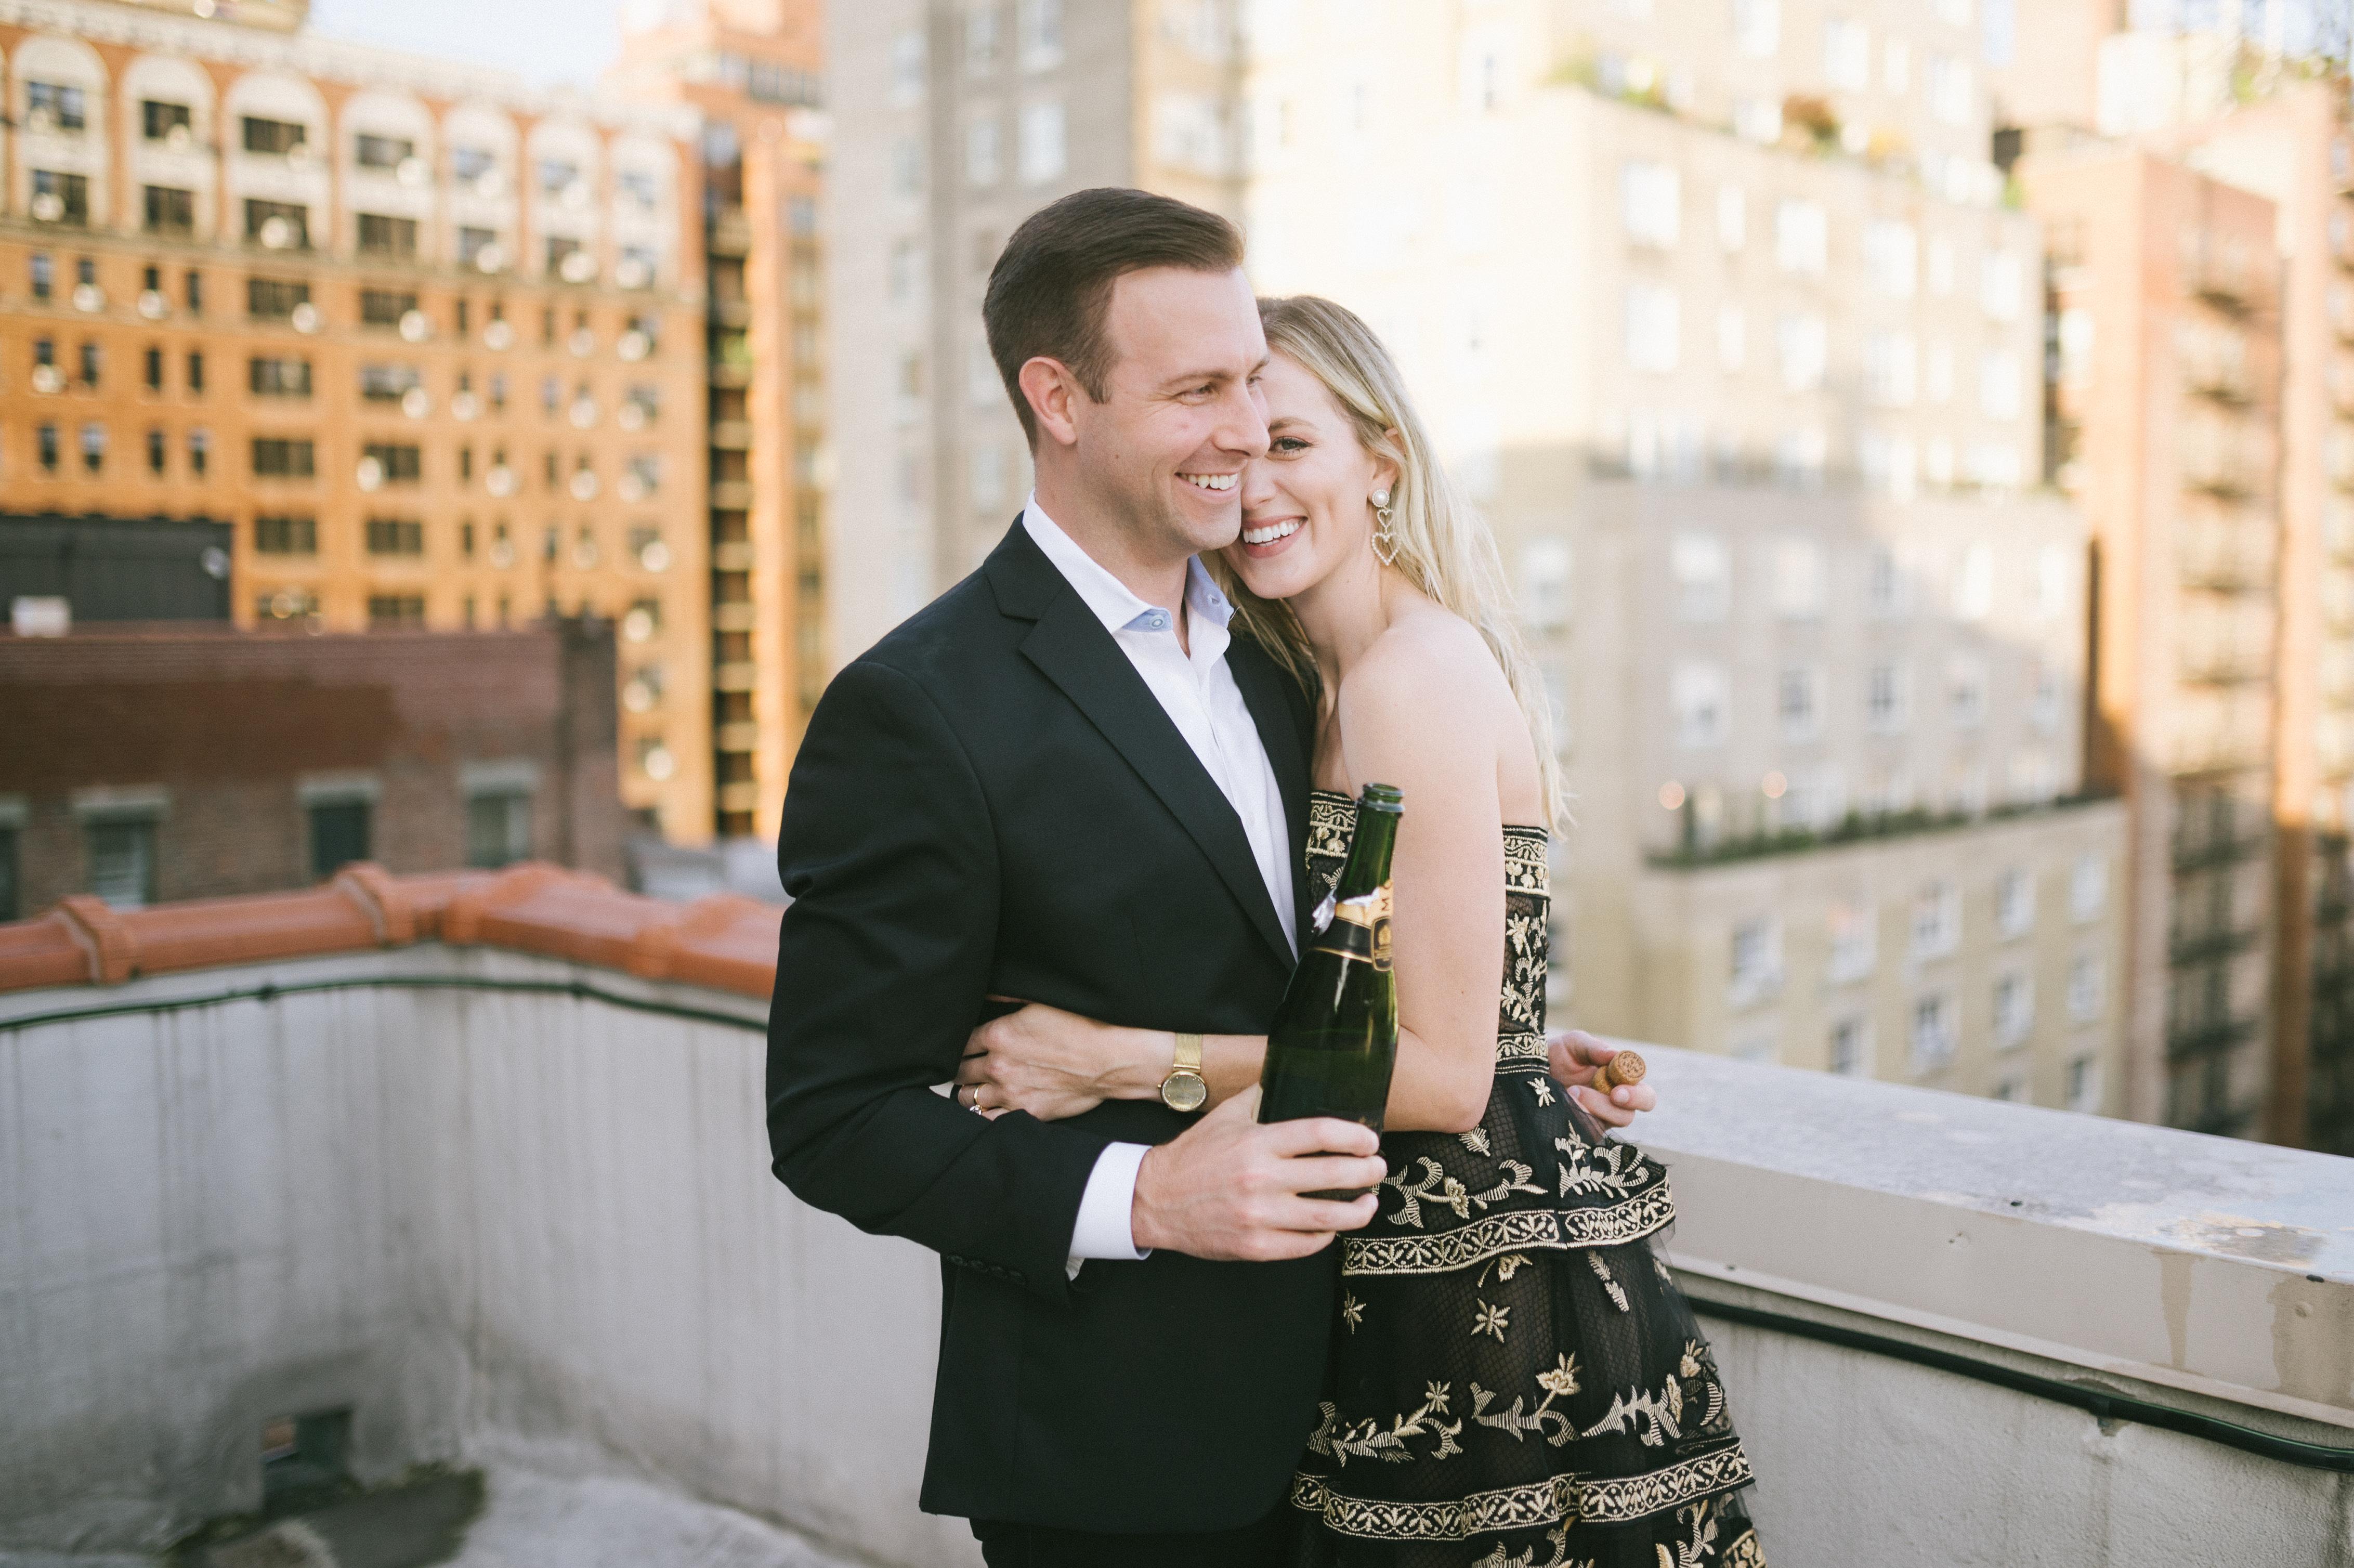 The Wedding Website of Elizabeth McLawhorn and Brandon Dillow